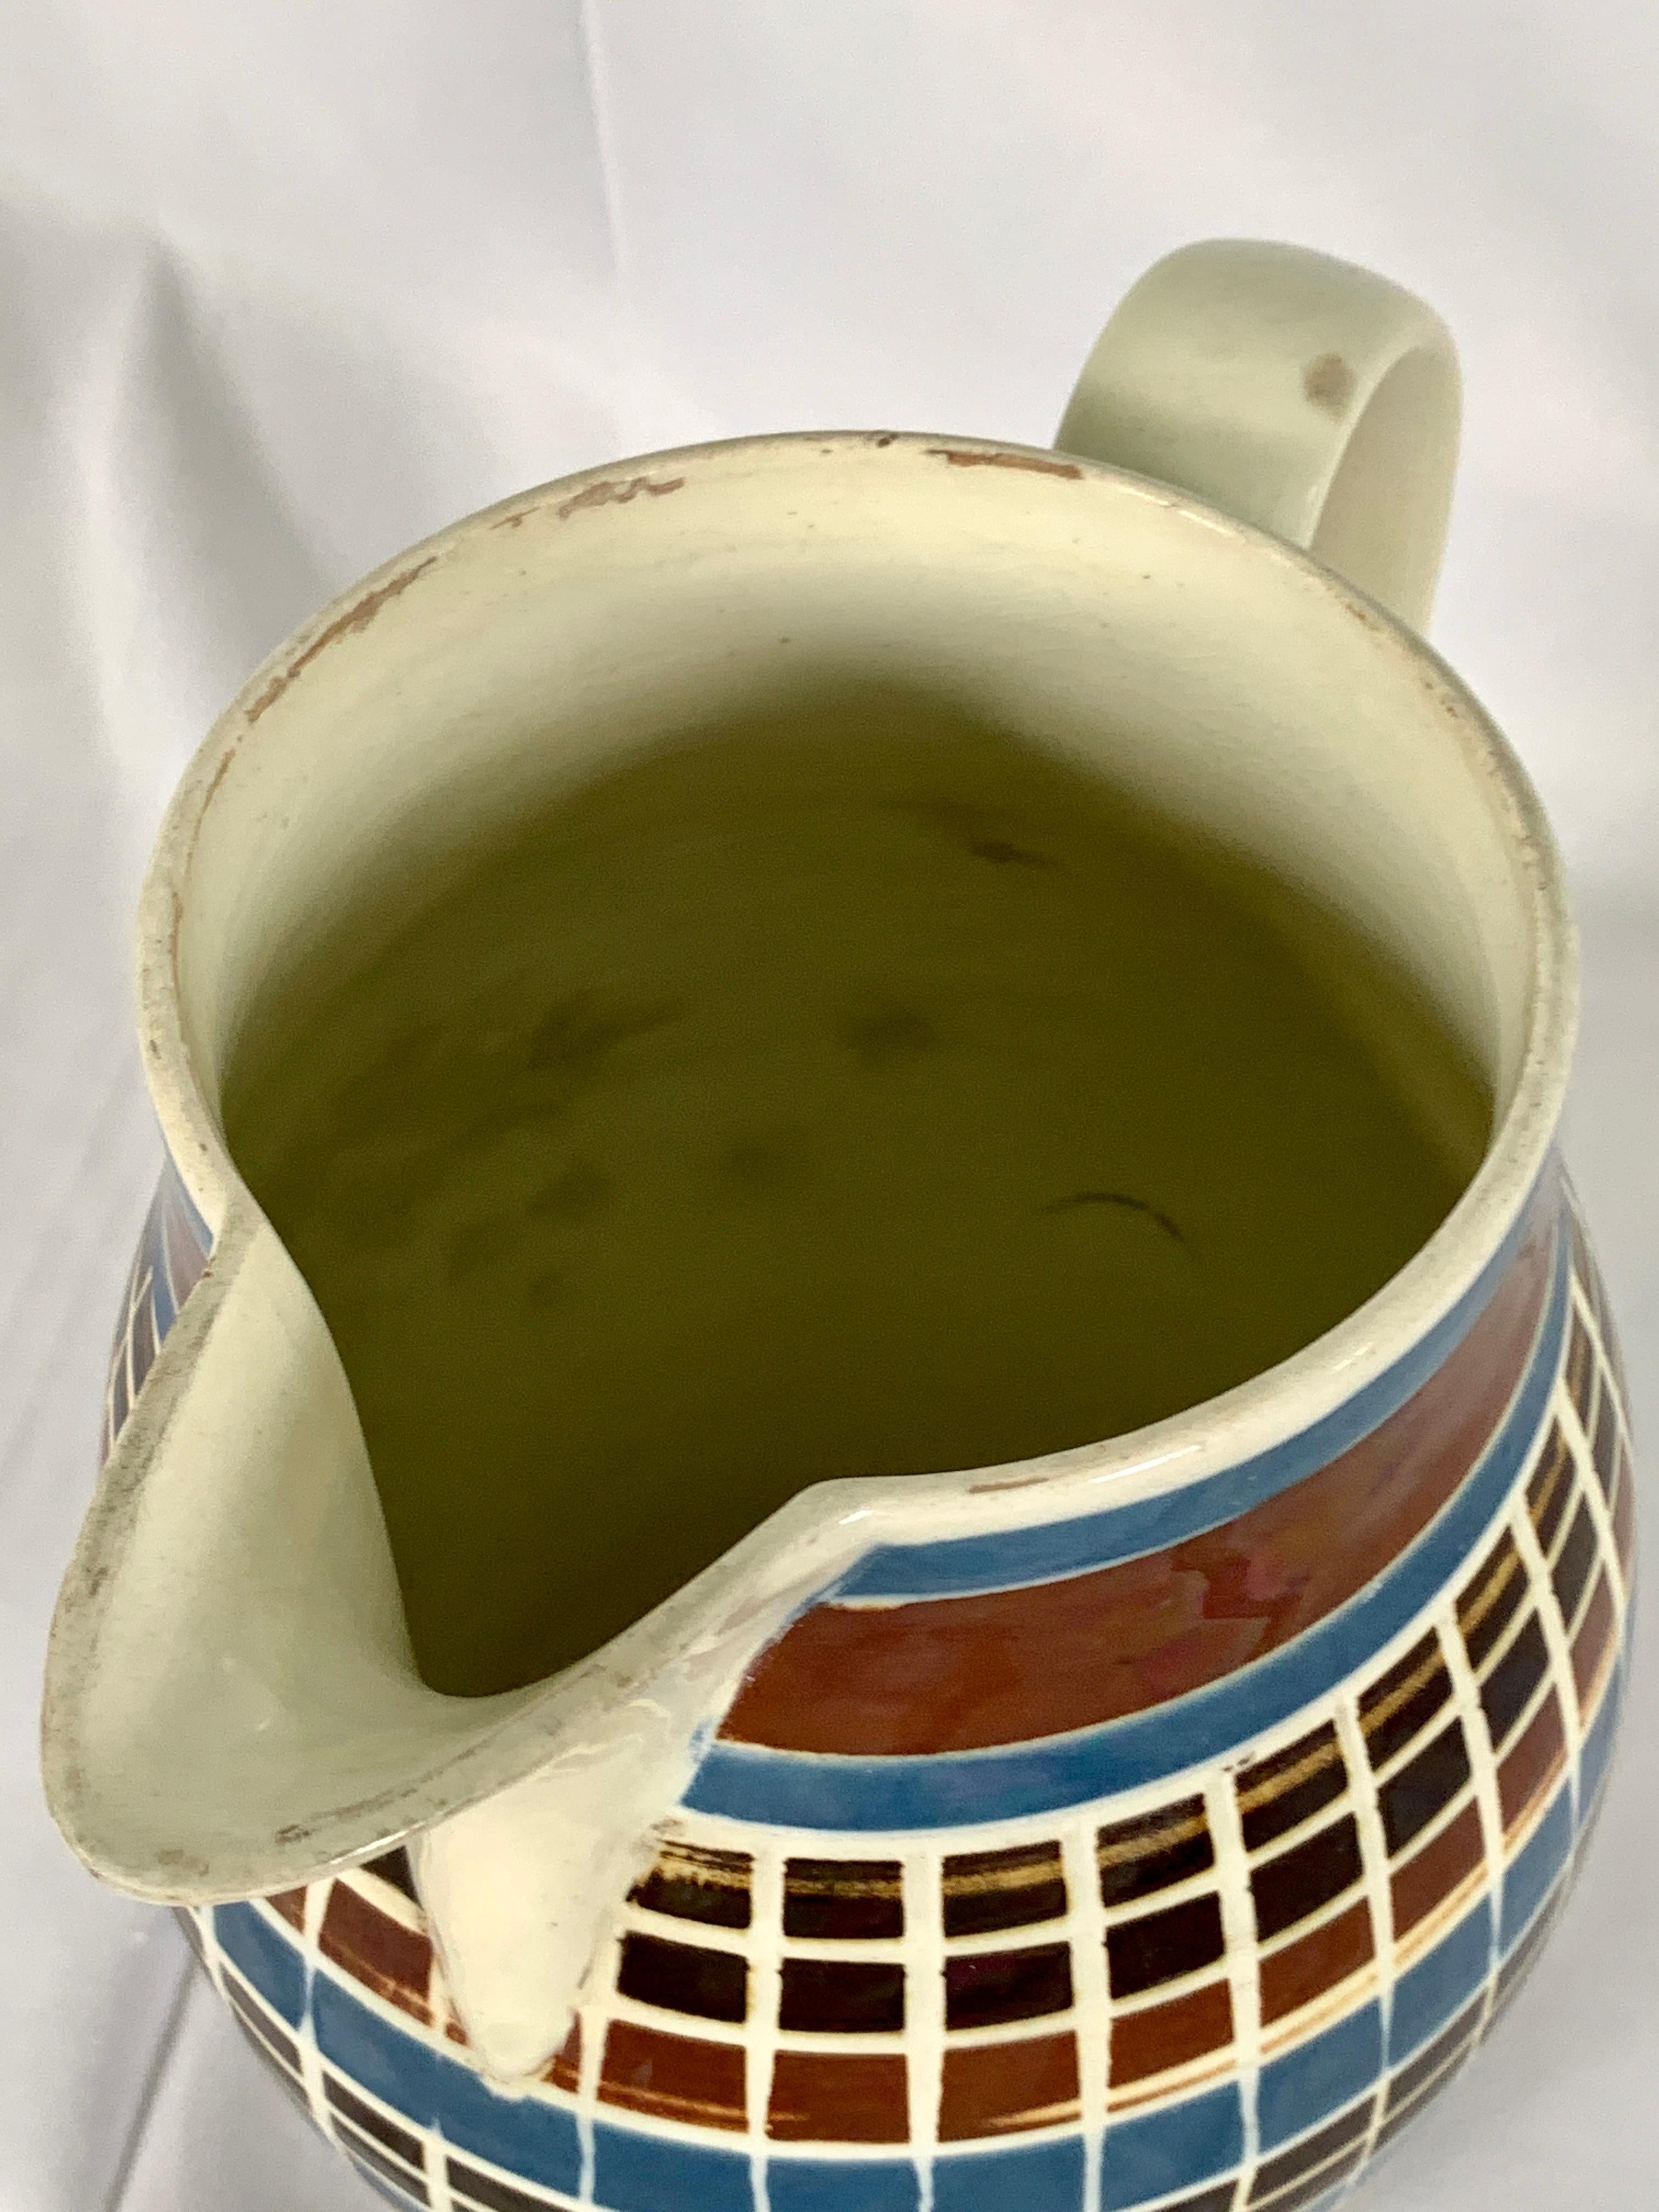 Early Mochaware Pitcher Cut Through the Colored Slip Made in England, circa 1800 1